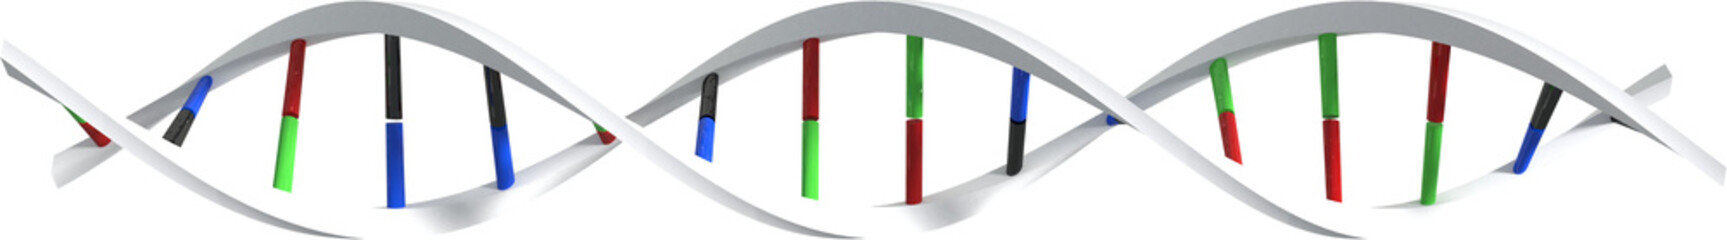 Image of 3d dna strand structure